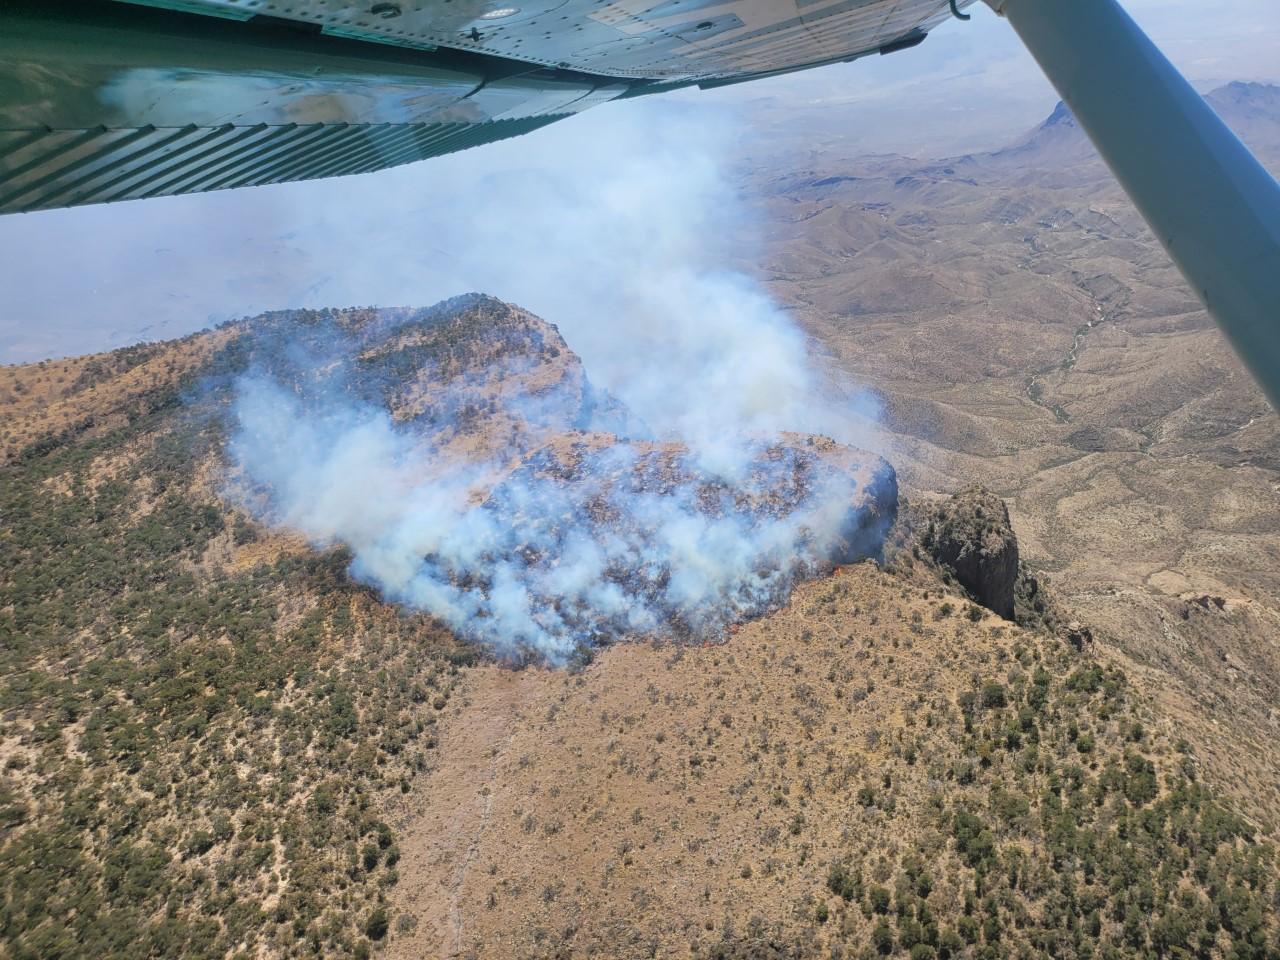 This photo shows an aerial view and smoke from the South Rim Too fire. Photo taken from park airplane.